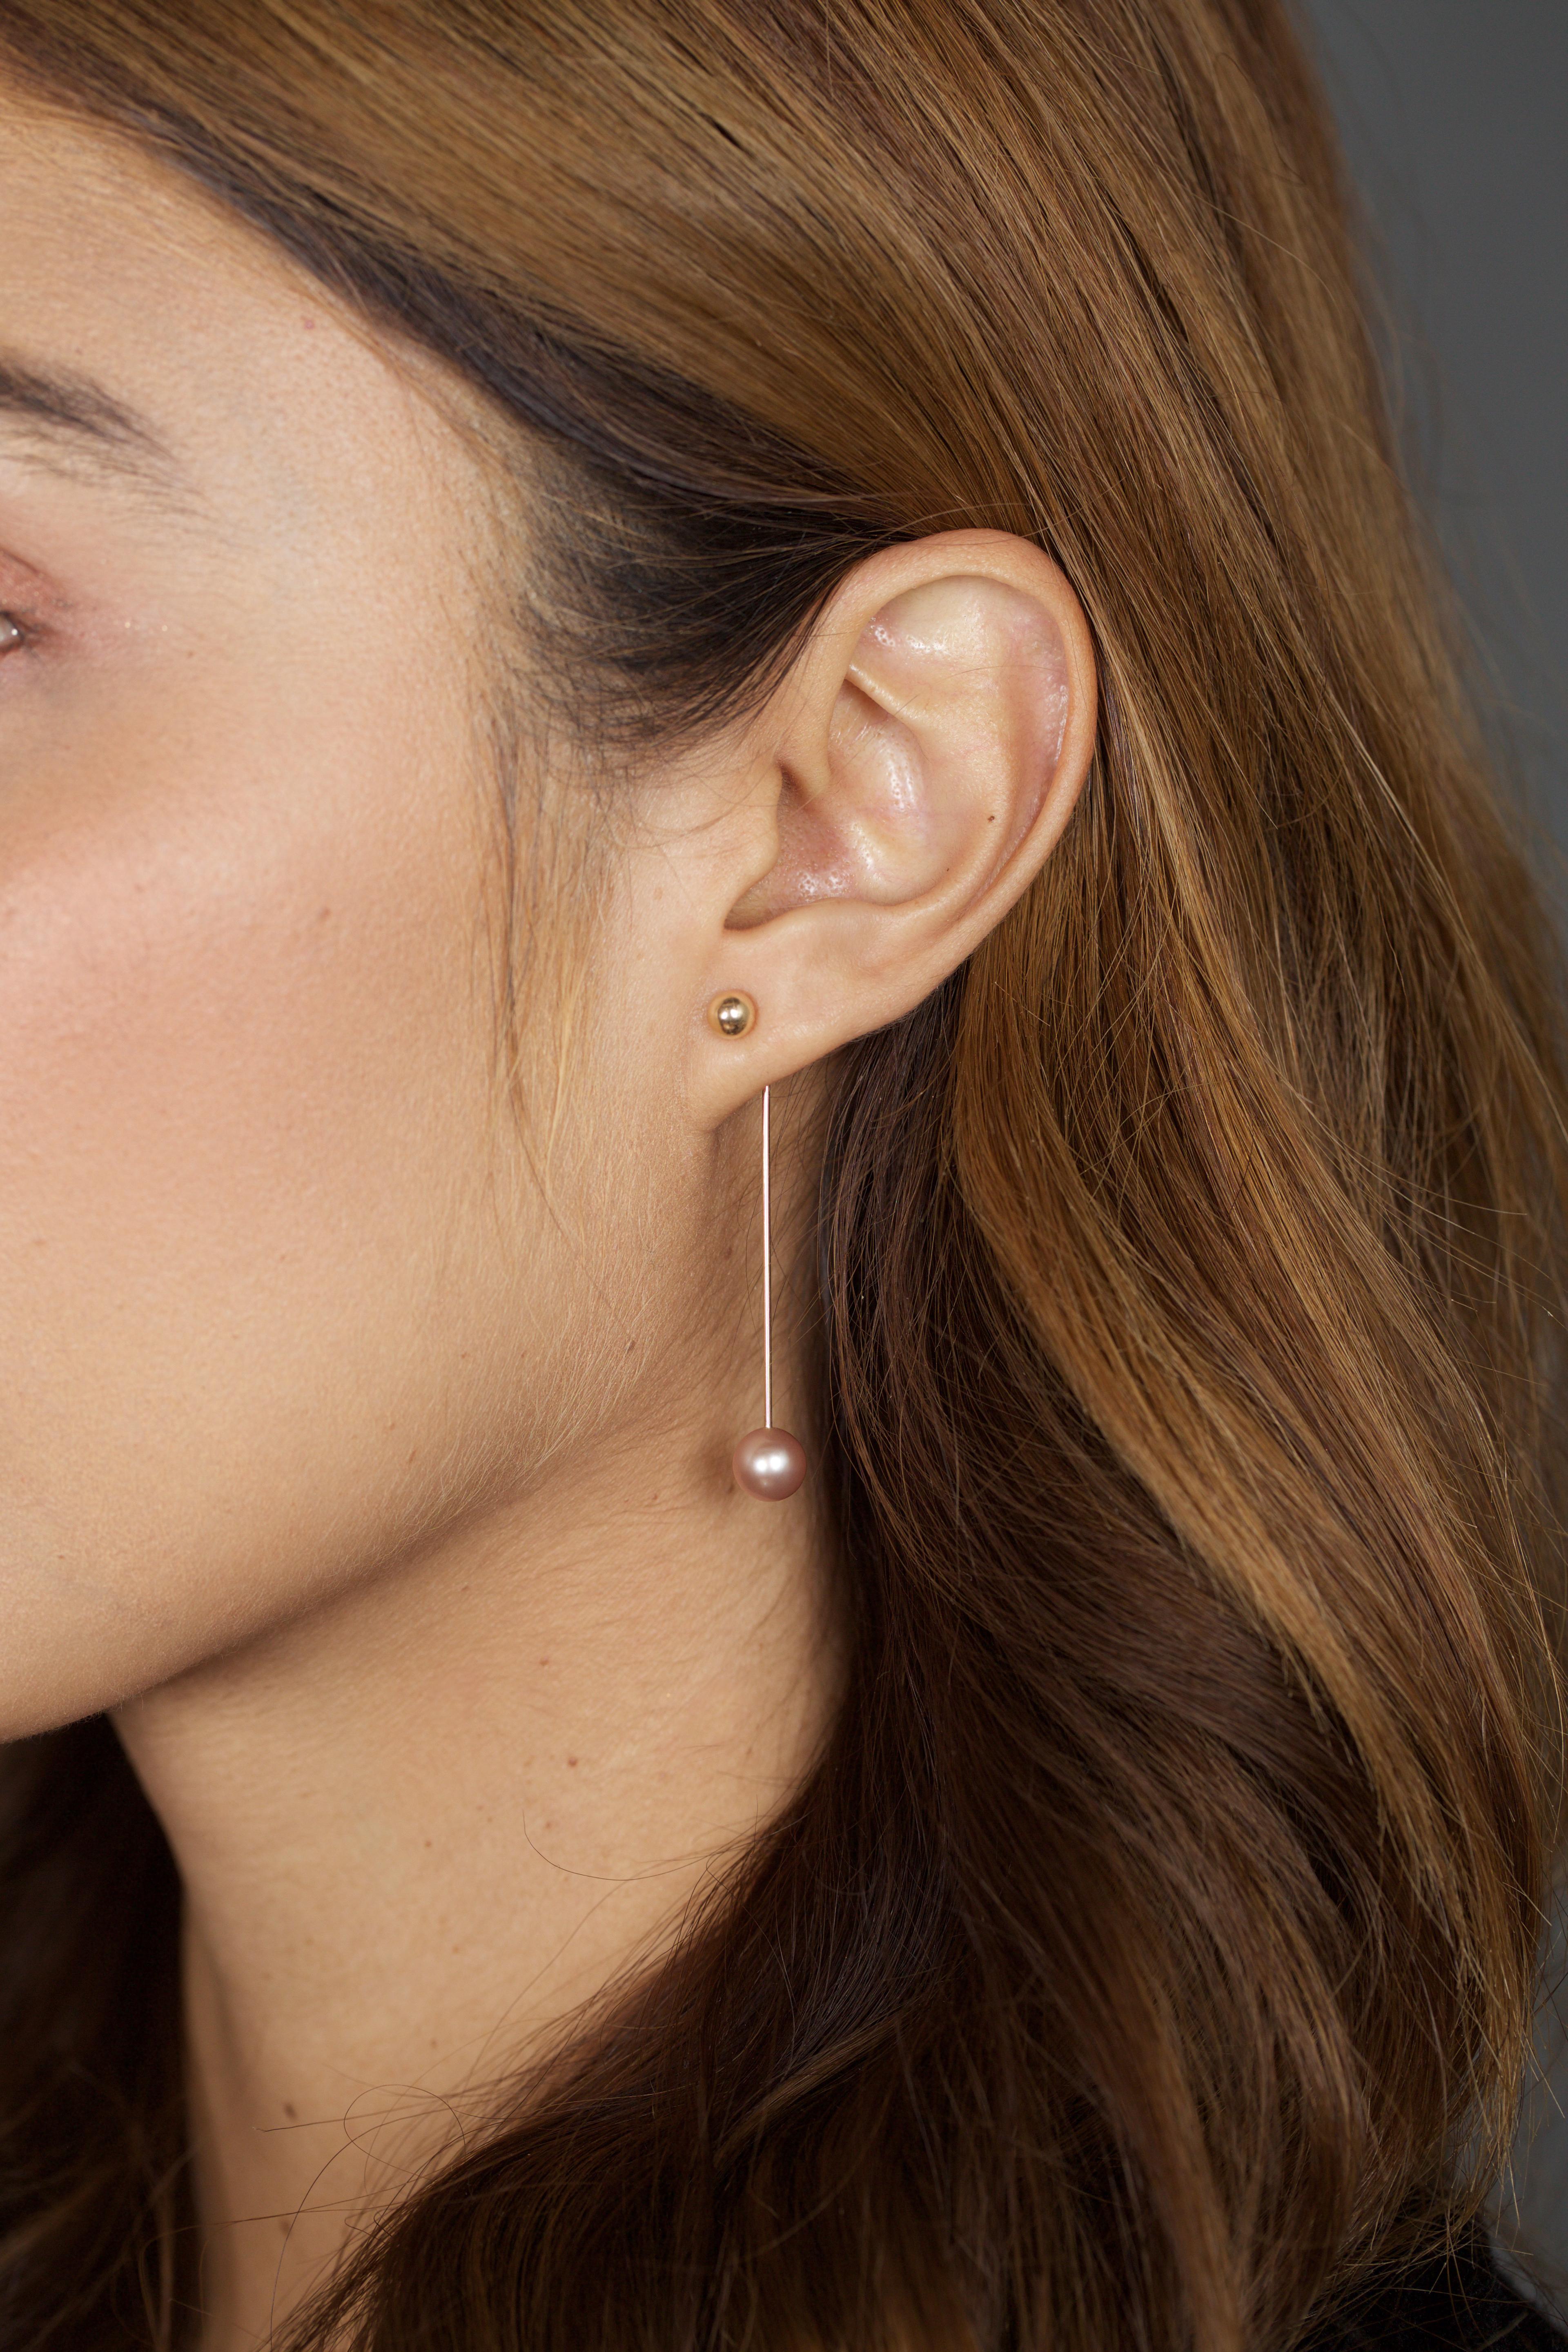 These earrings have a luminescent large pink pearl (can also be made with a white pearl)  which swings on a 14k yellow gold bar behind the earlobe.  It's paired with a classic gold ball stud, but you can change up the look anytime with a stud of